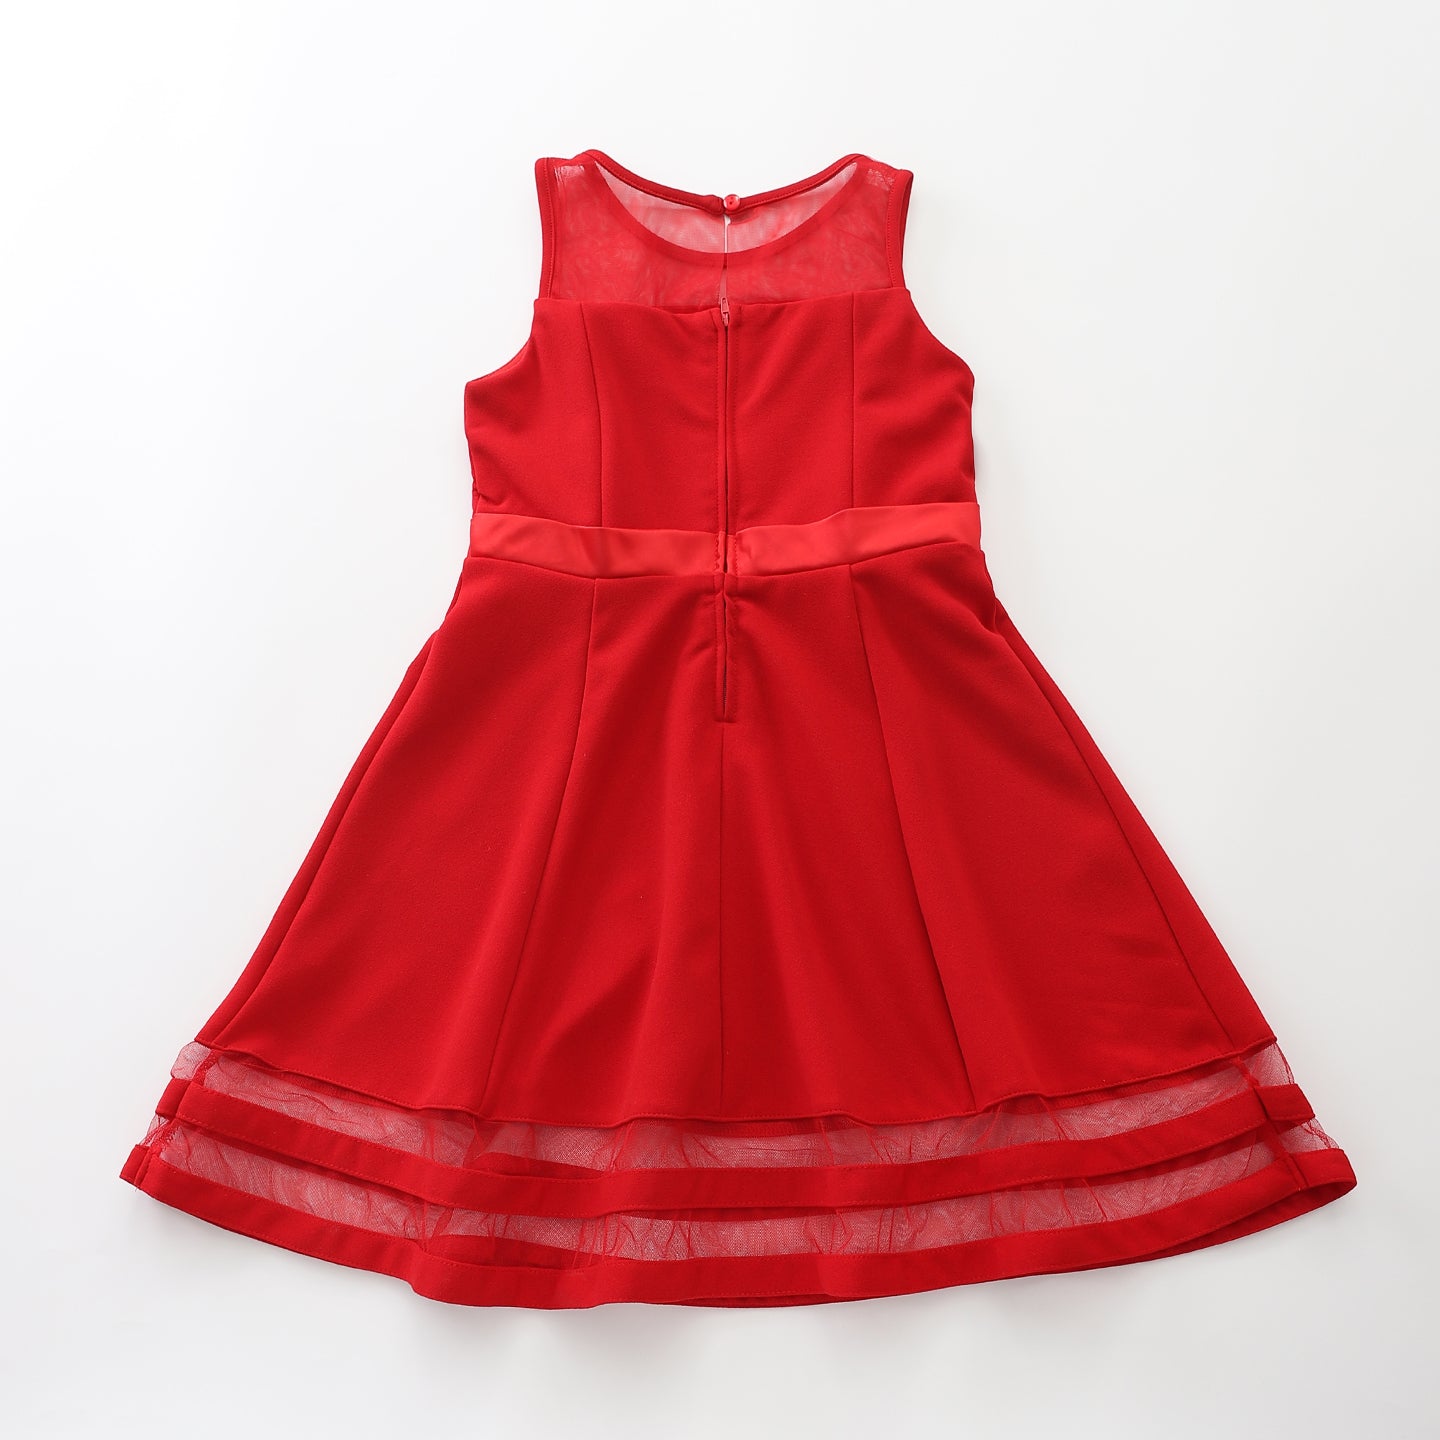 Little Miss Girl’s Formal Red Panelled Party Dress